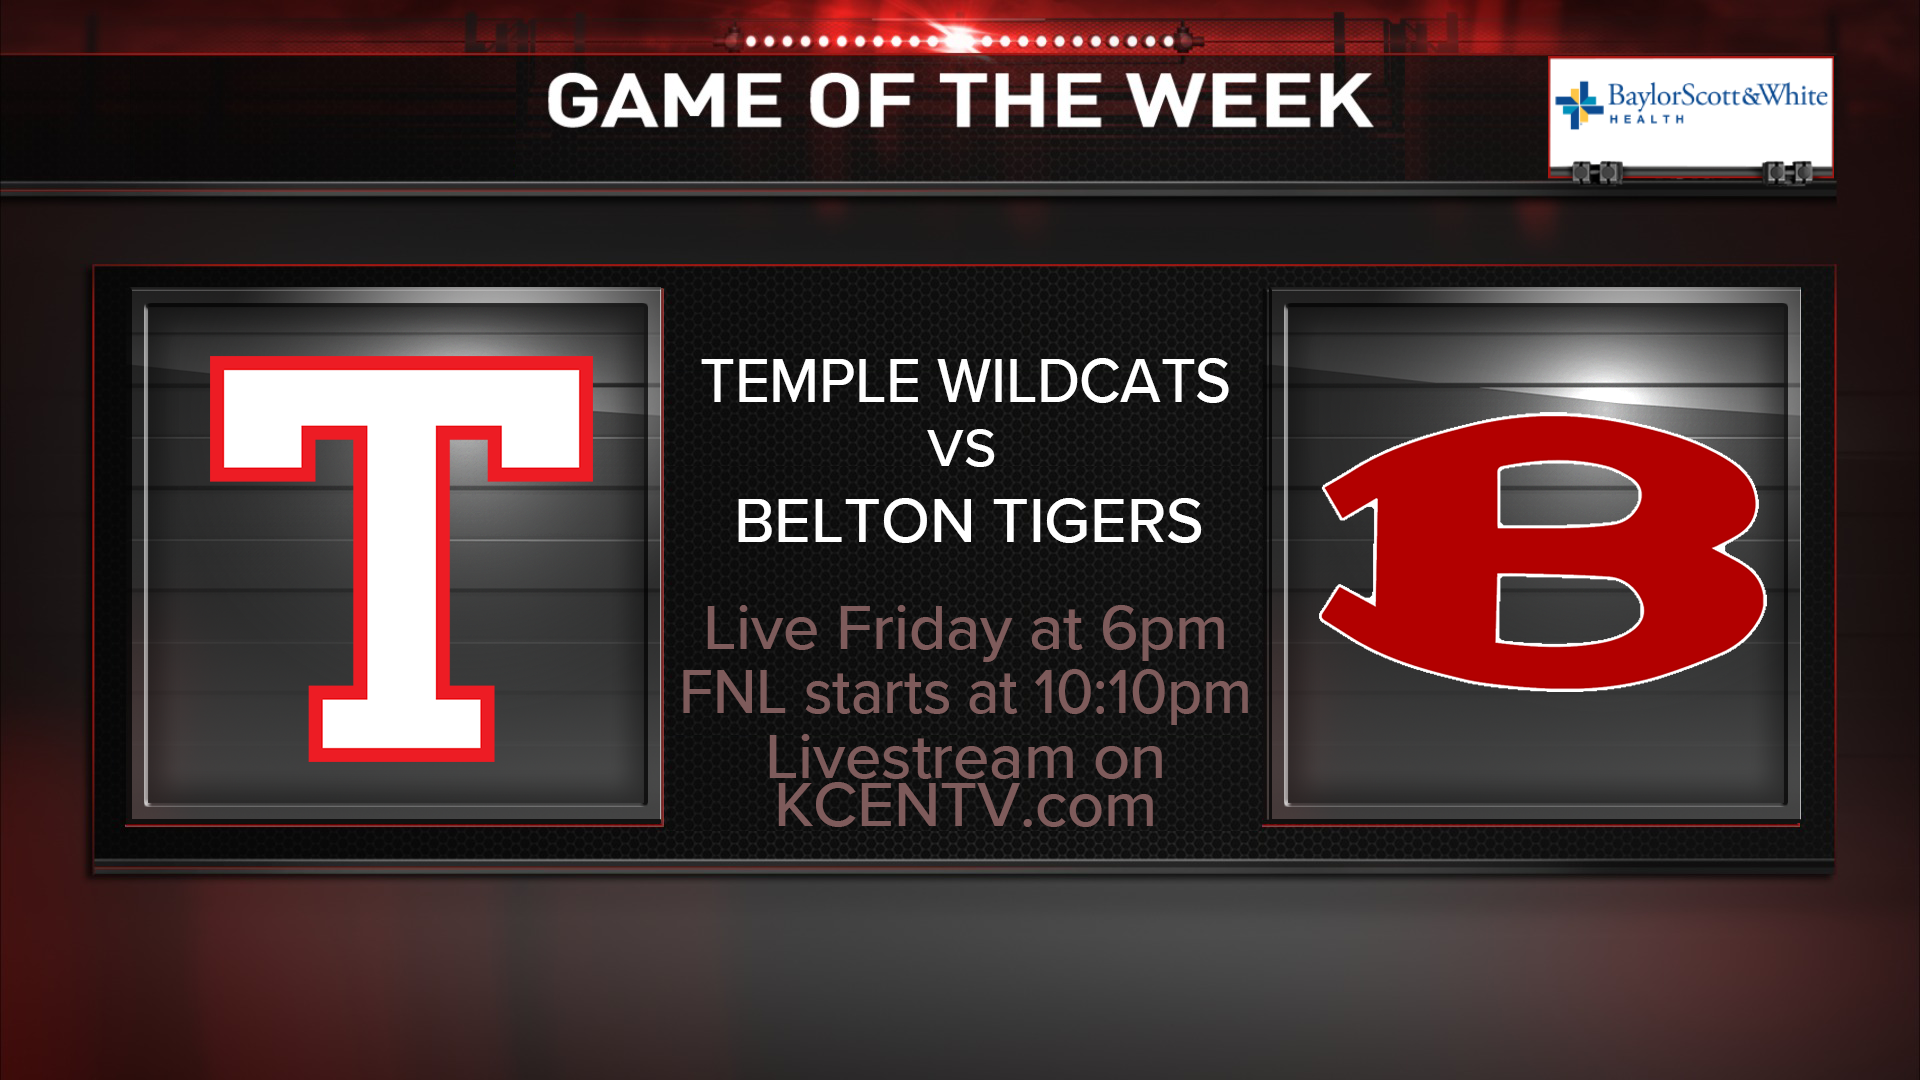 Belton will play against Temple in this week’s Game of the Week